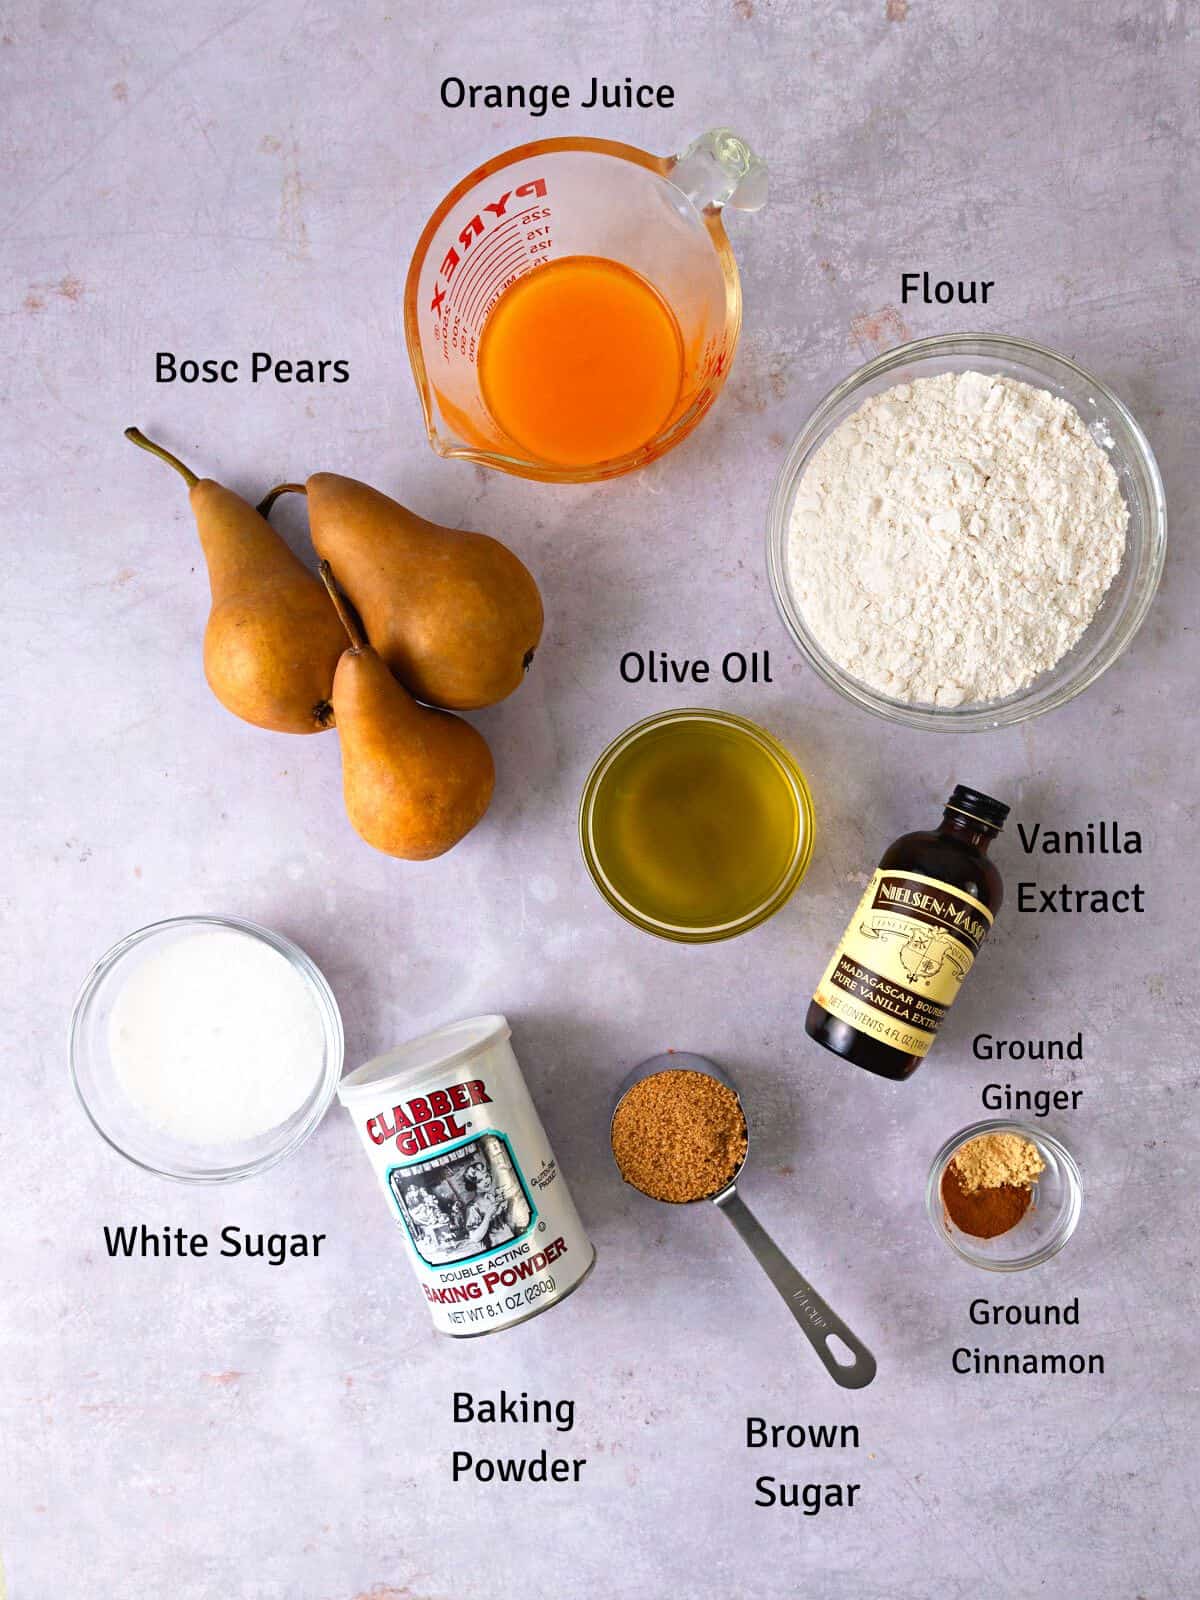 Ingredients for pear ginger cake with olive oil and vanilla extract.